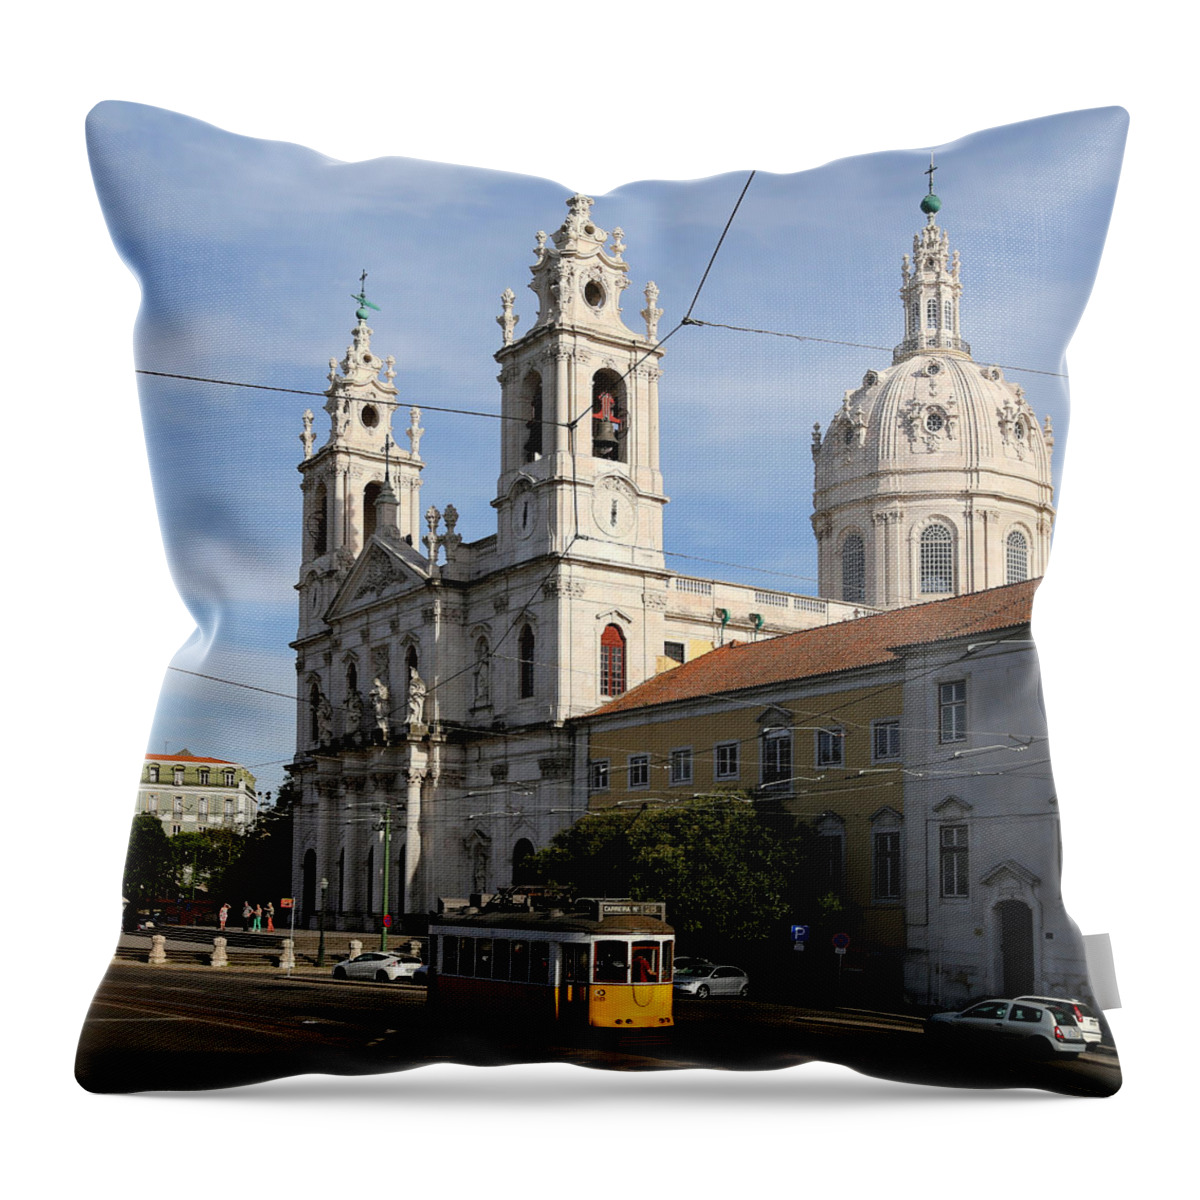 Trolley Throw Pillow featuring the photograph Lisbon Trolley 5 by Andrew Fare